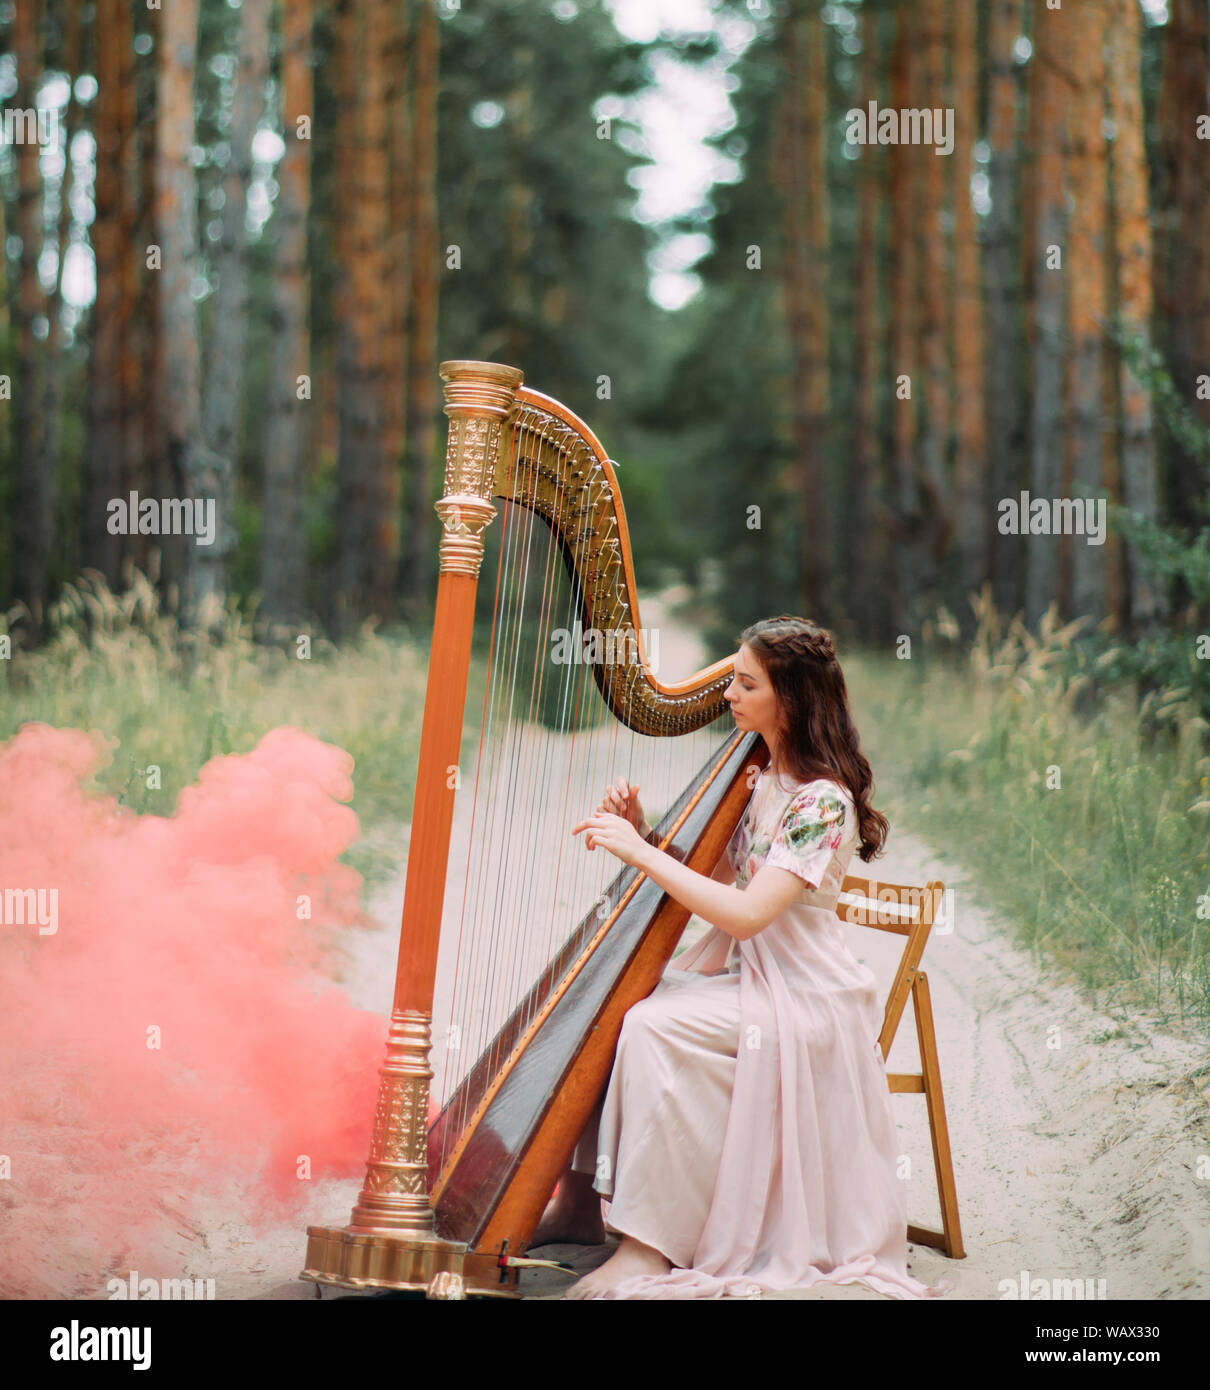 Smoking Lady Plays in the Forest